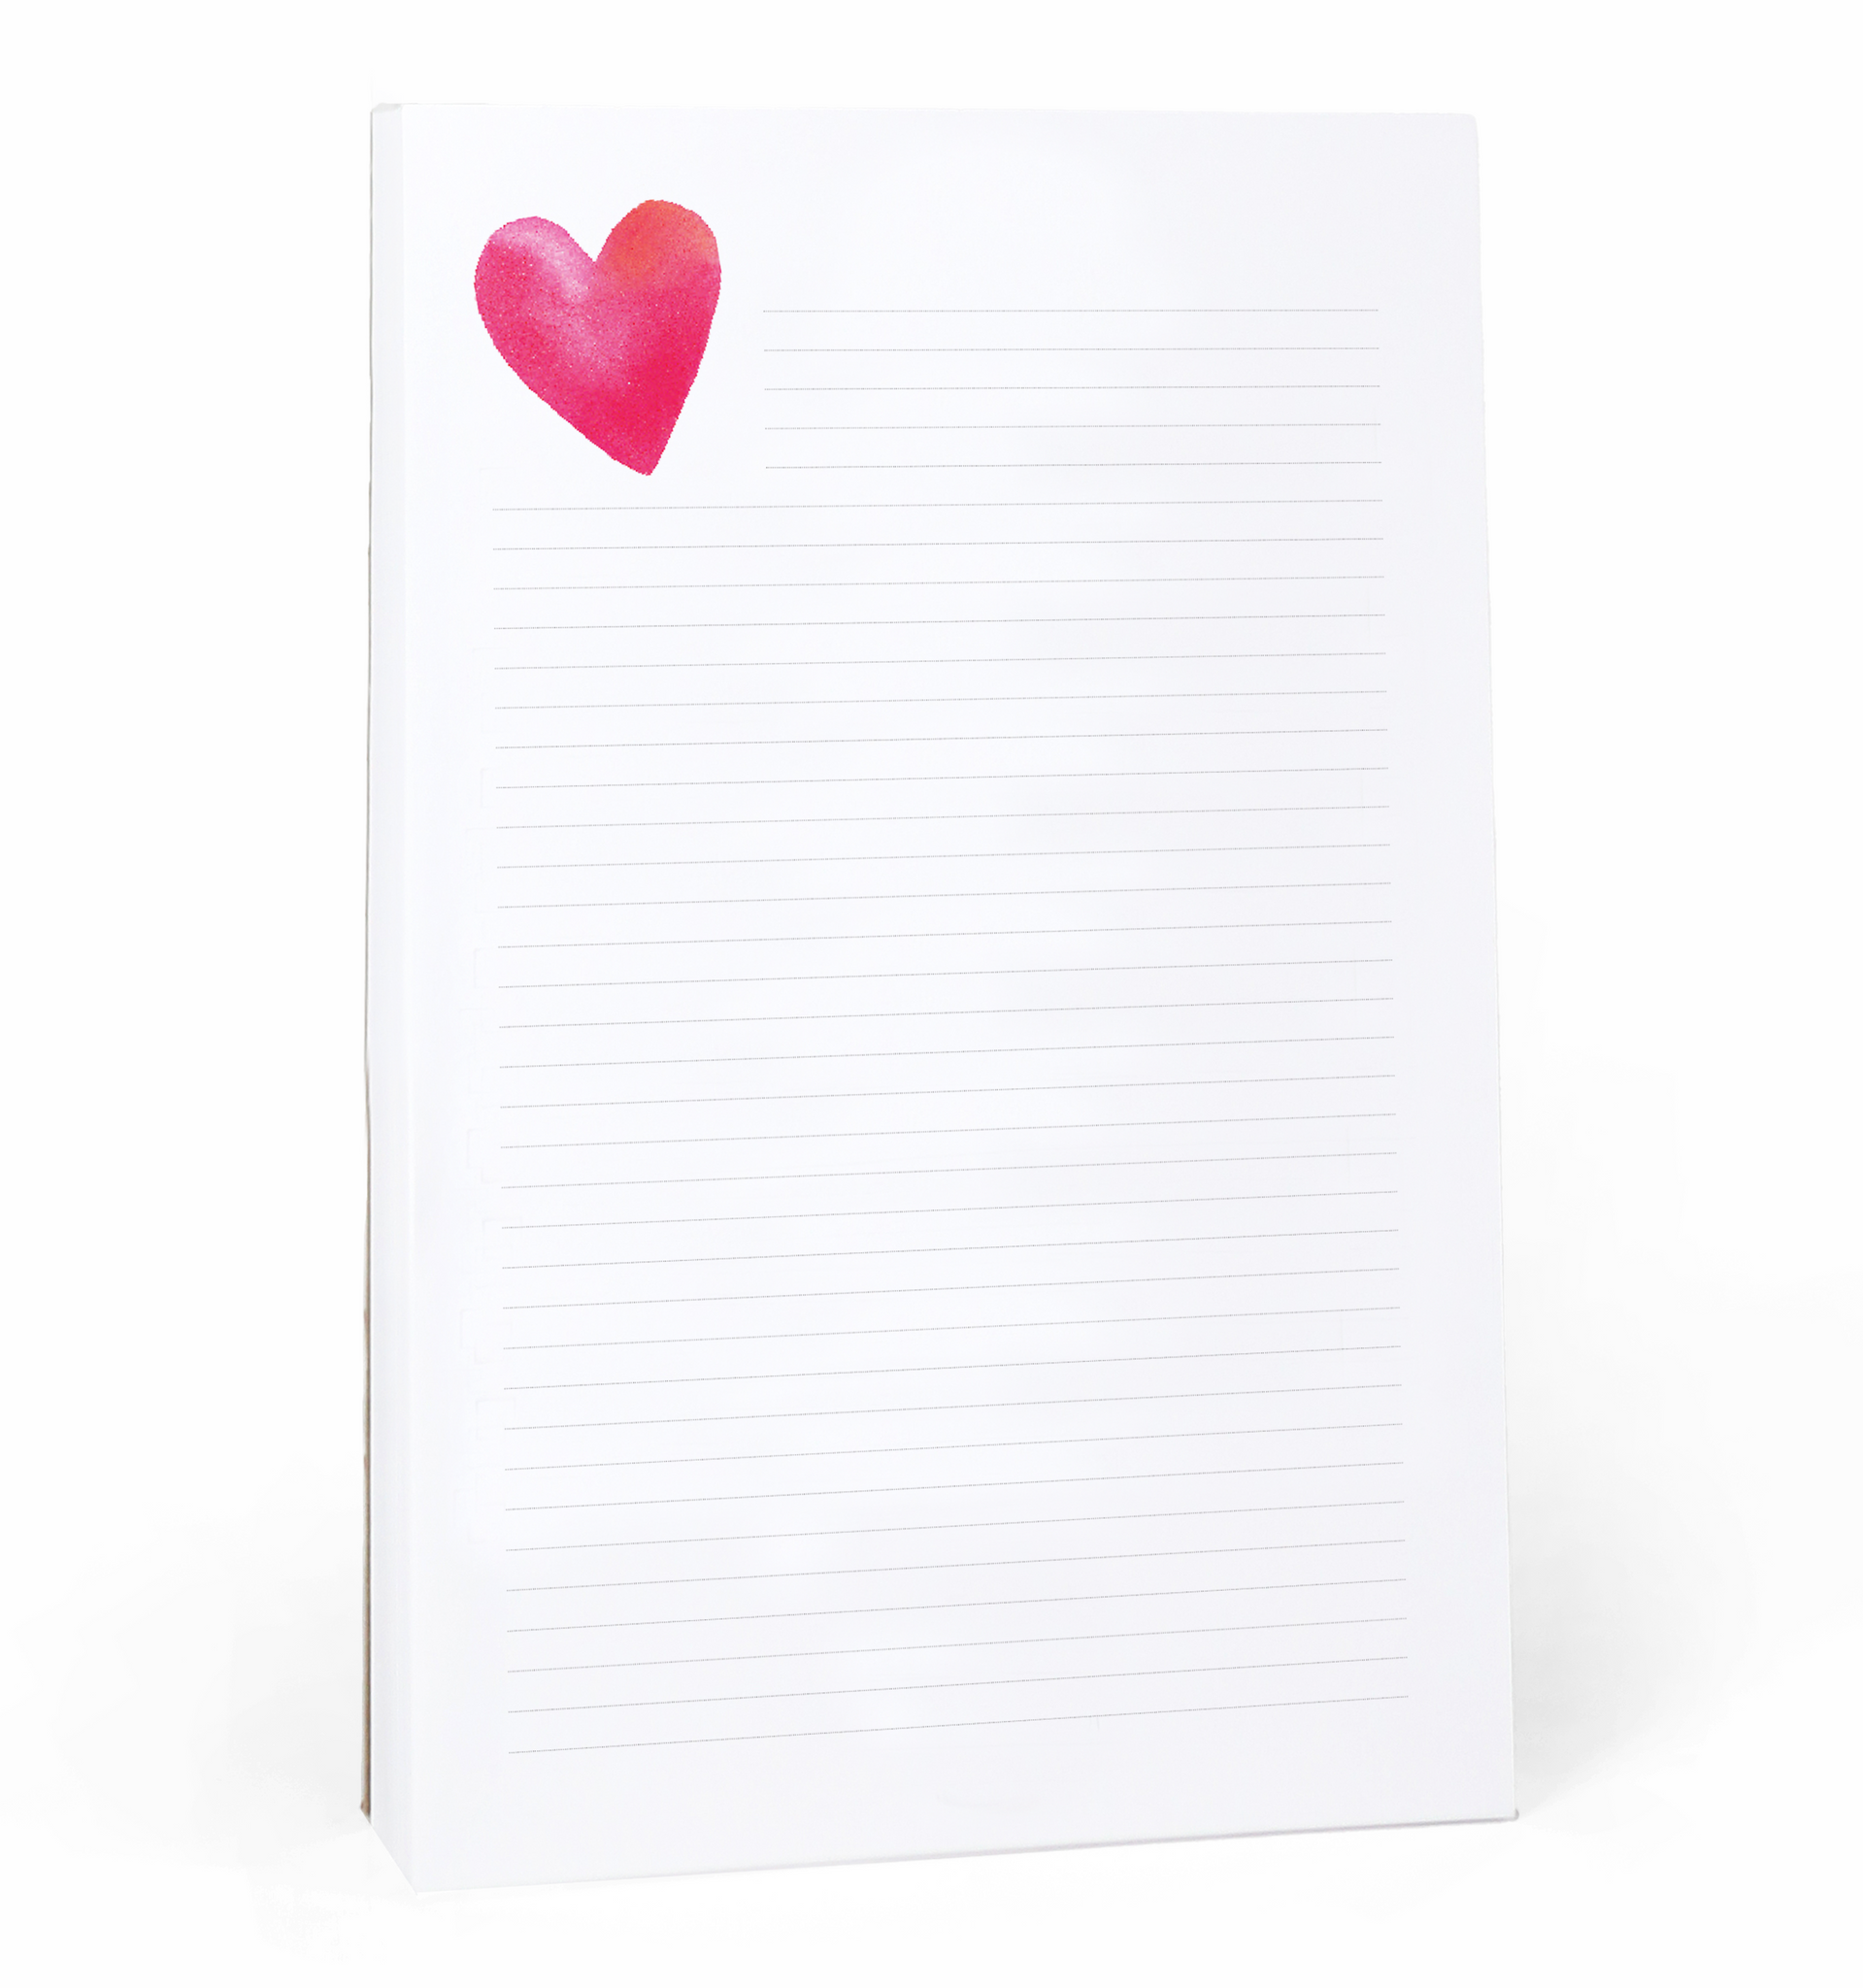 E. Frances Heart Lined Notepad with a pink heart sticker on the cover against a white background, accompanied by a pen.